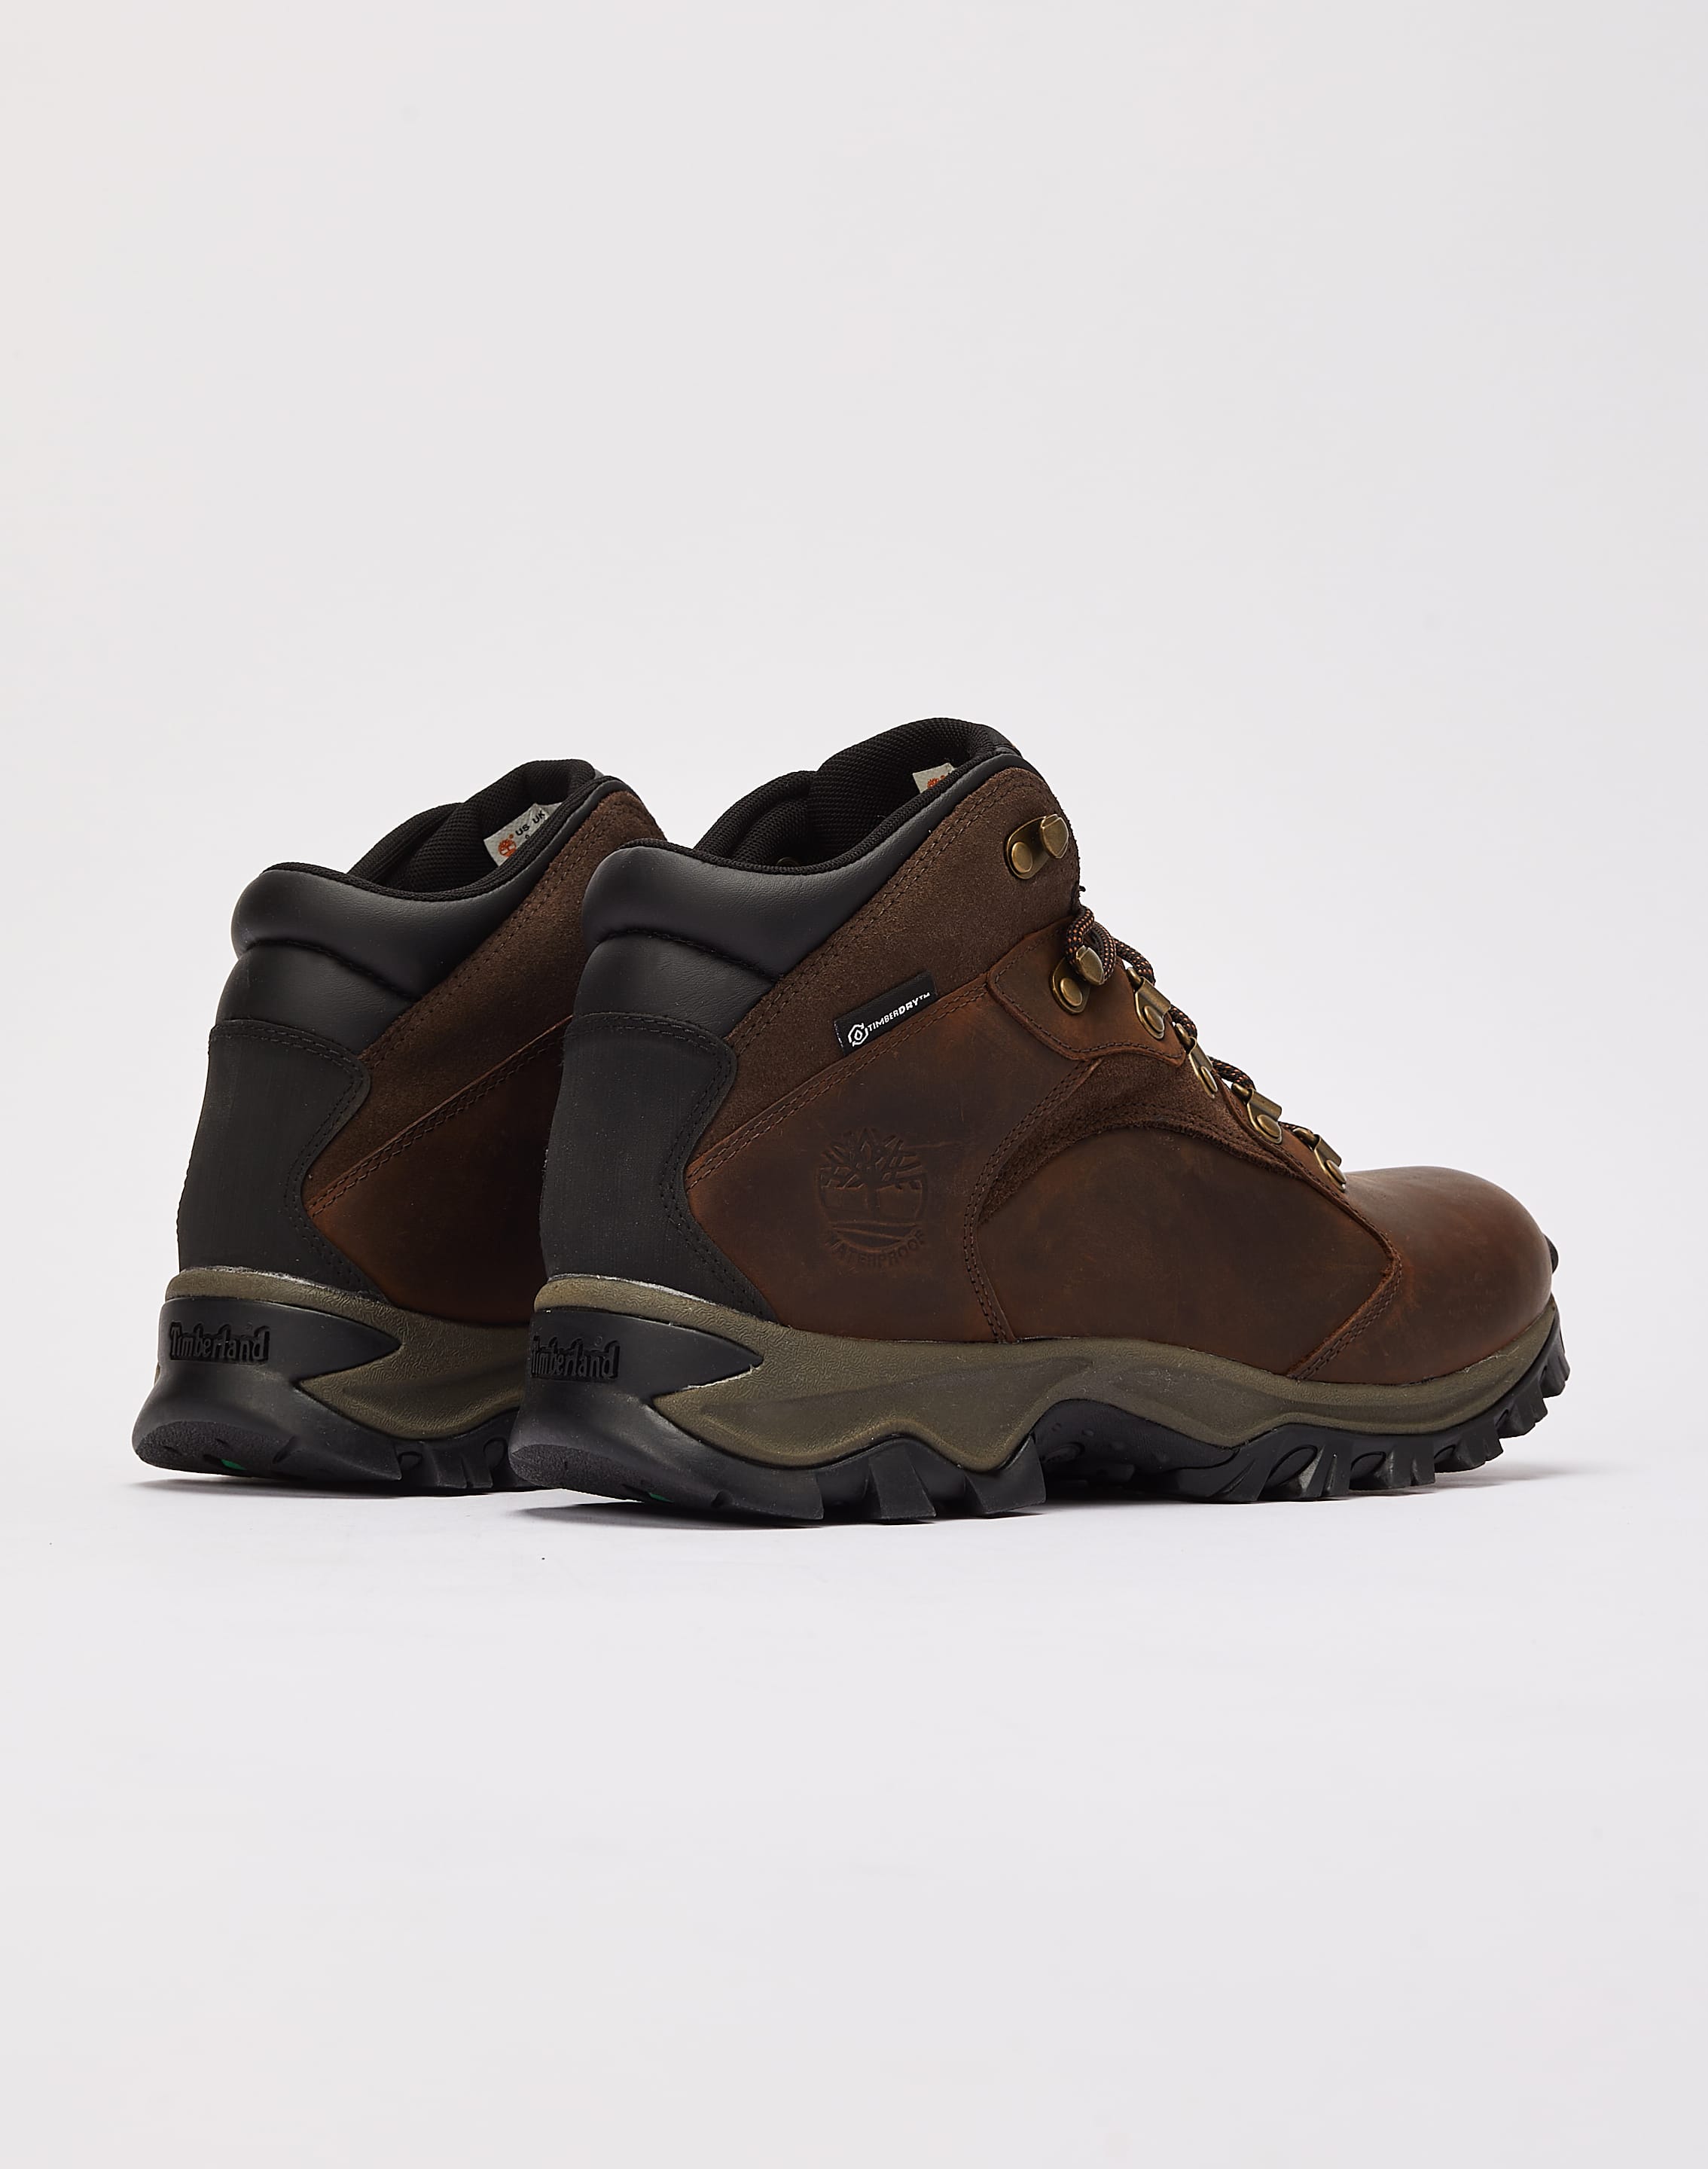 Timberland Rockrimmon Hiking Boots – DTLR